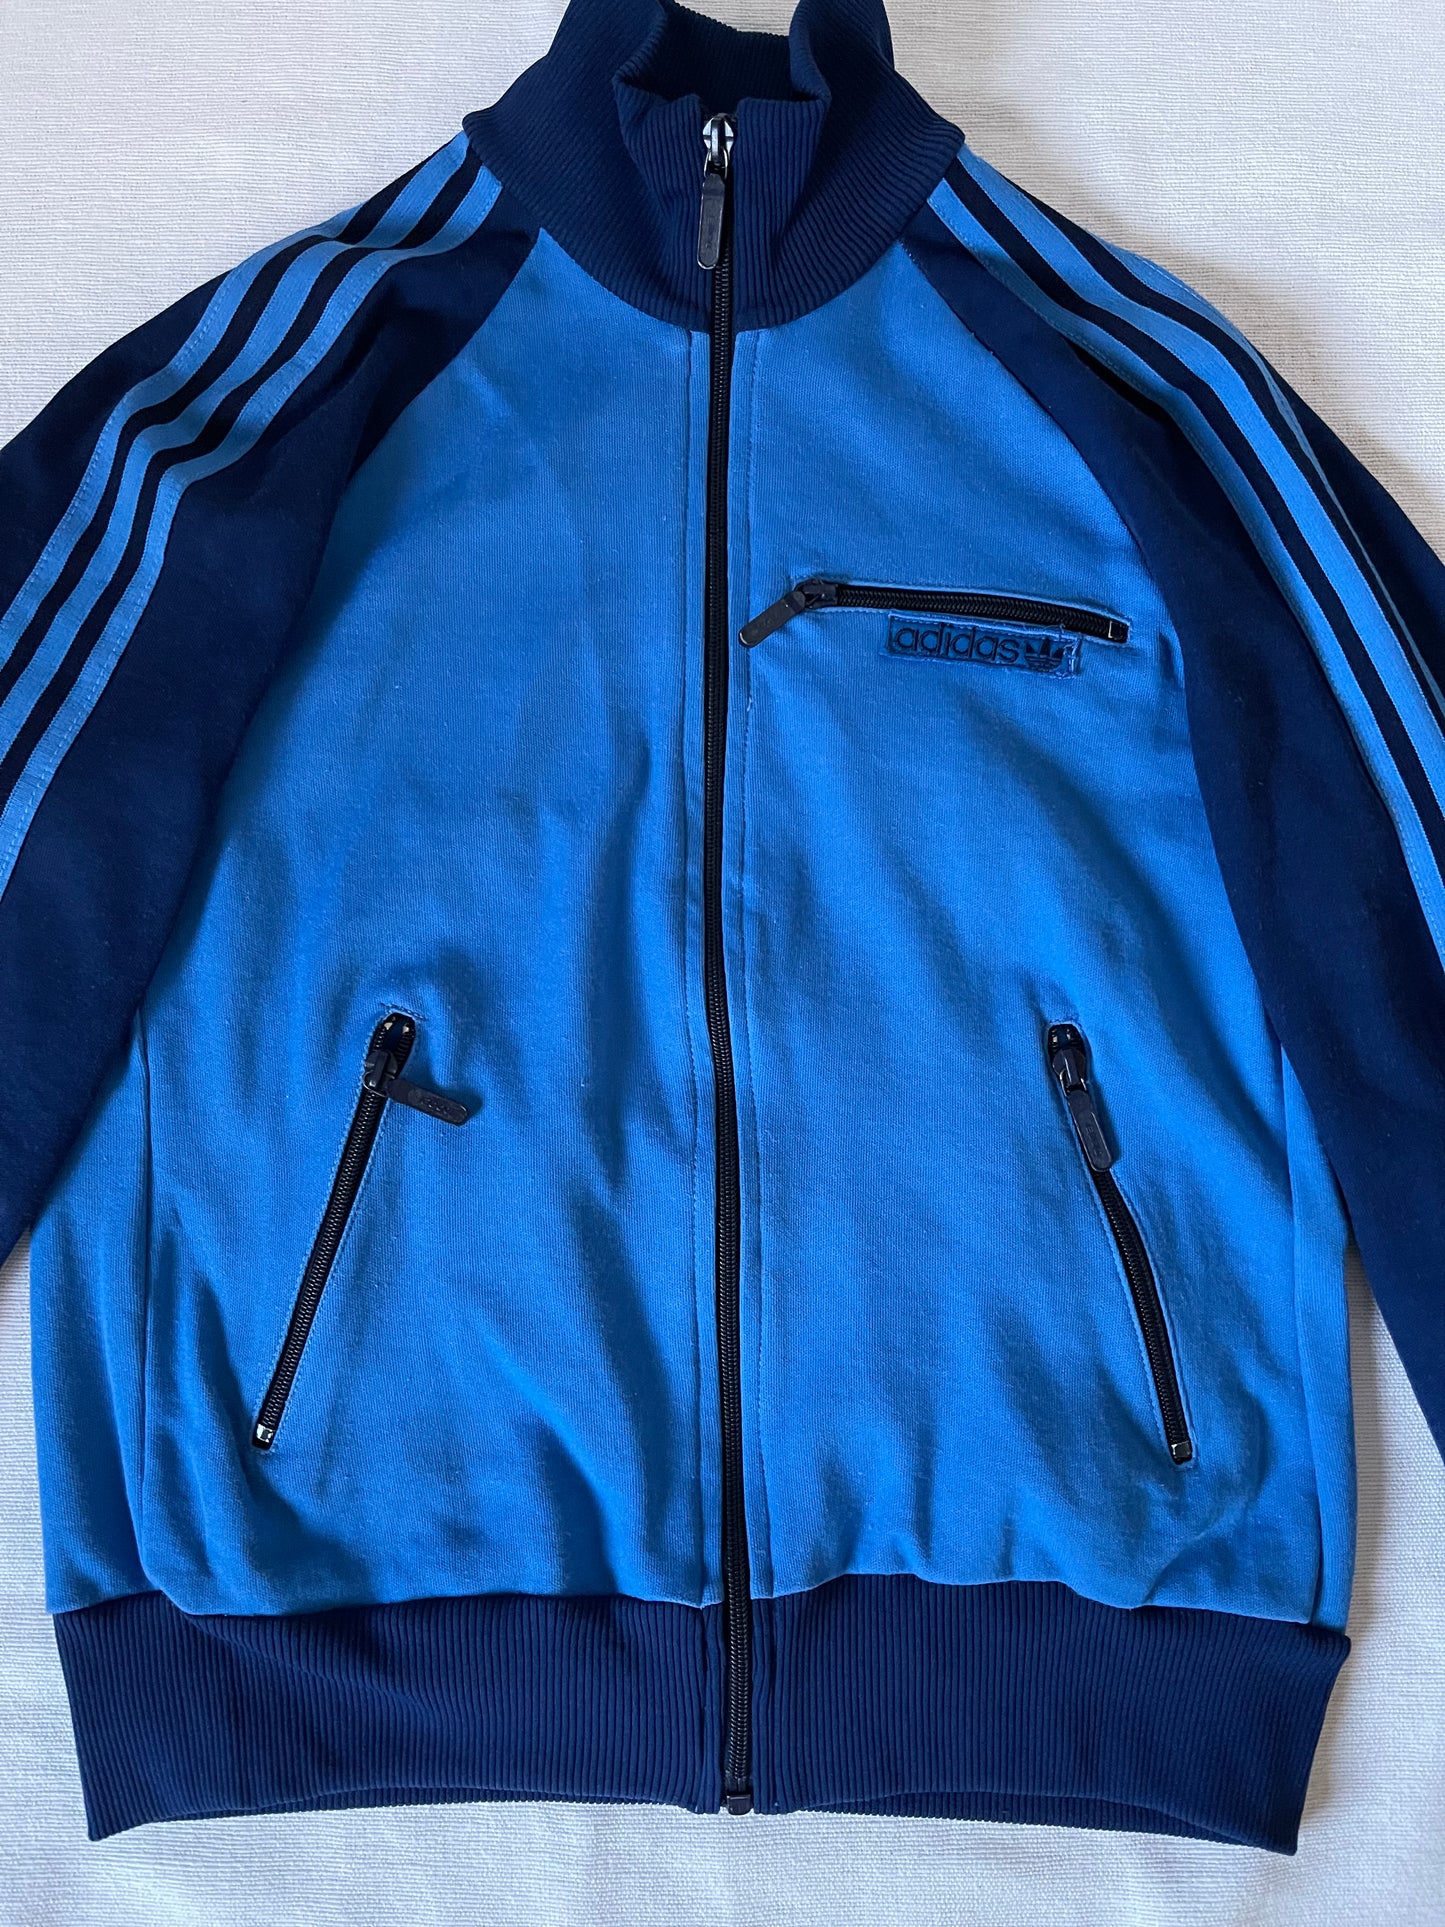 Vintage 70's Adidas Jacket Track Top Blue Made in Yugoslavia Size S-M